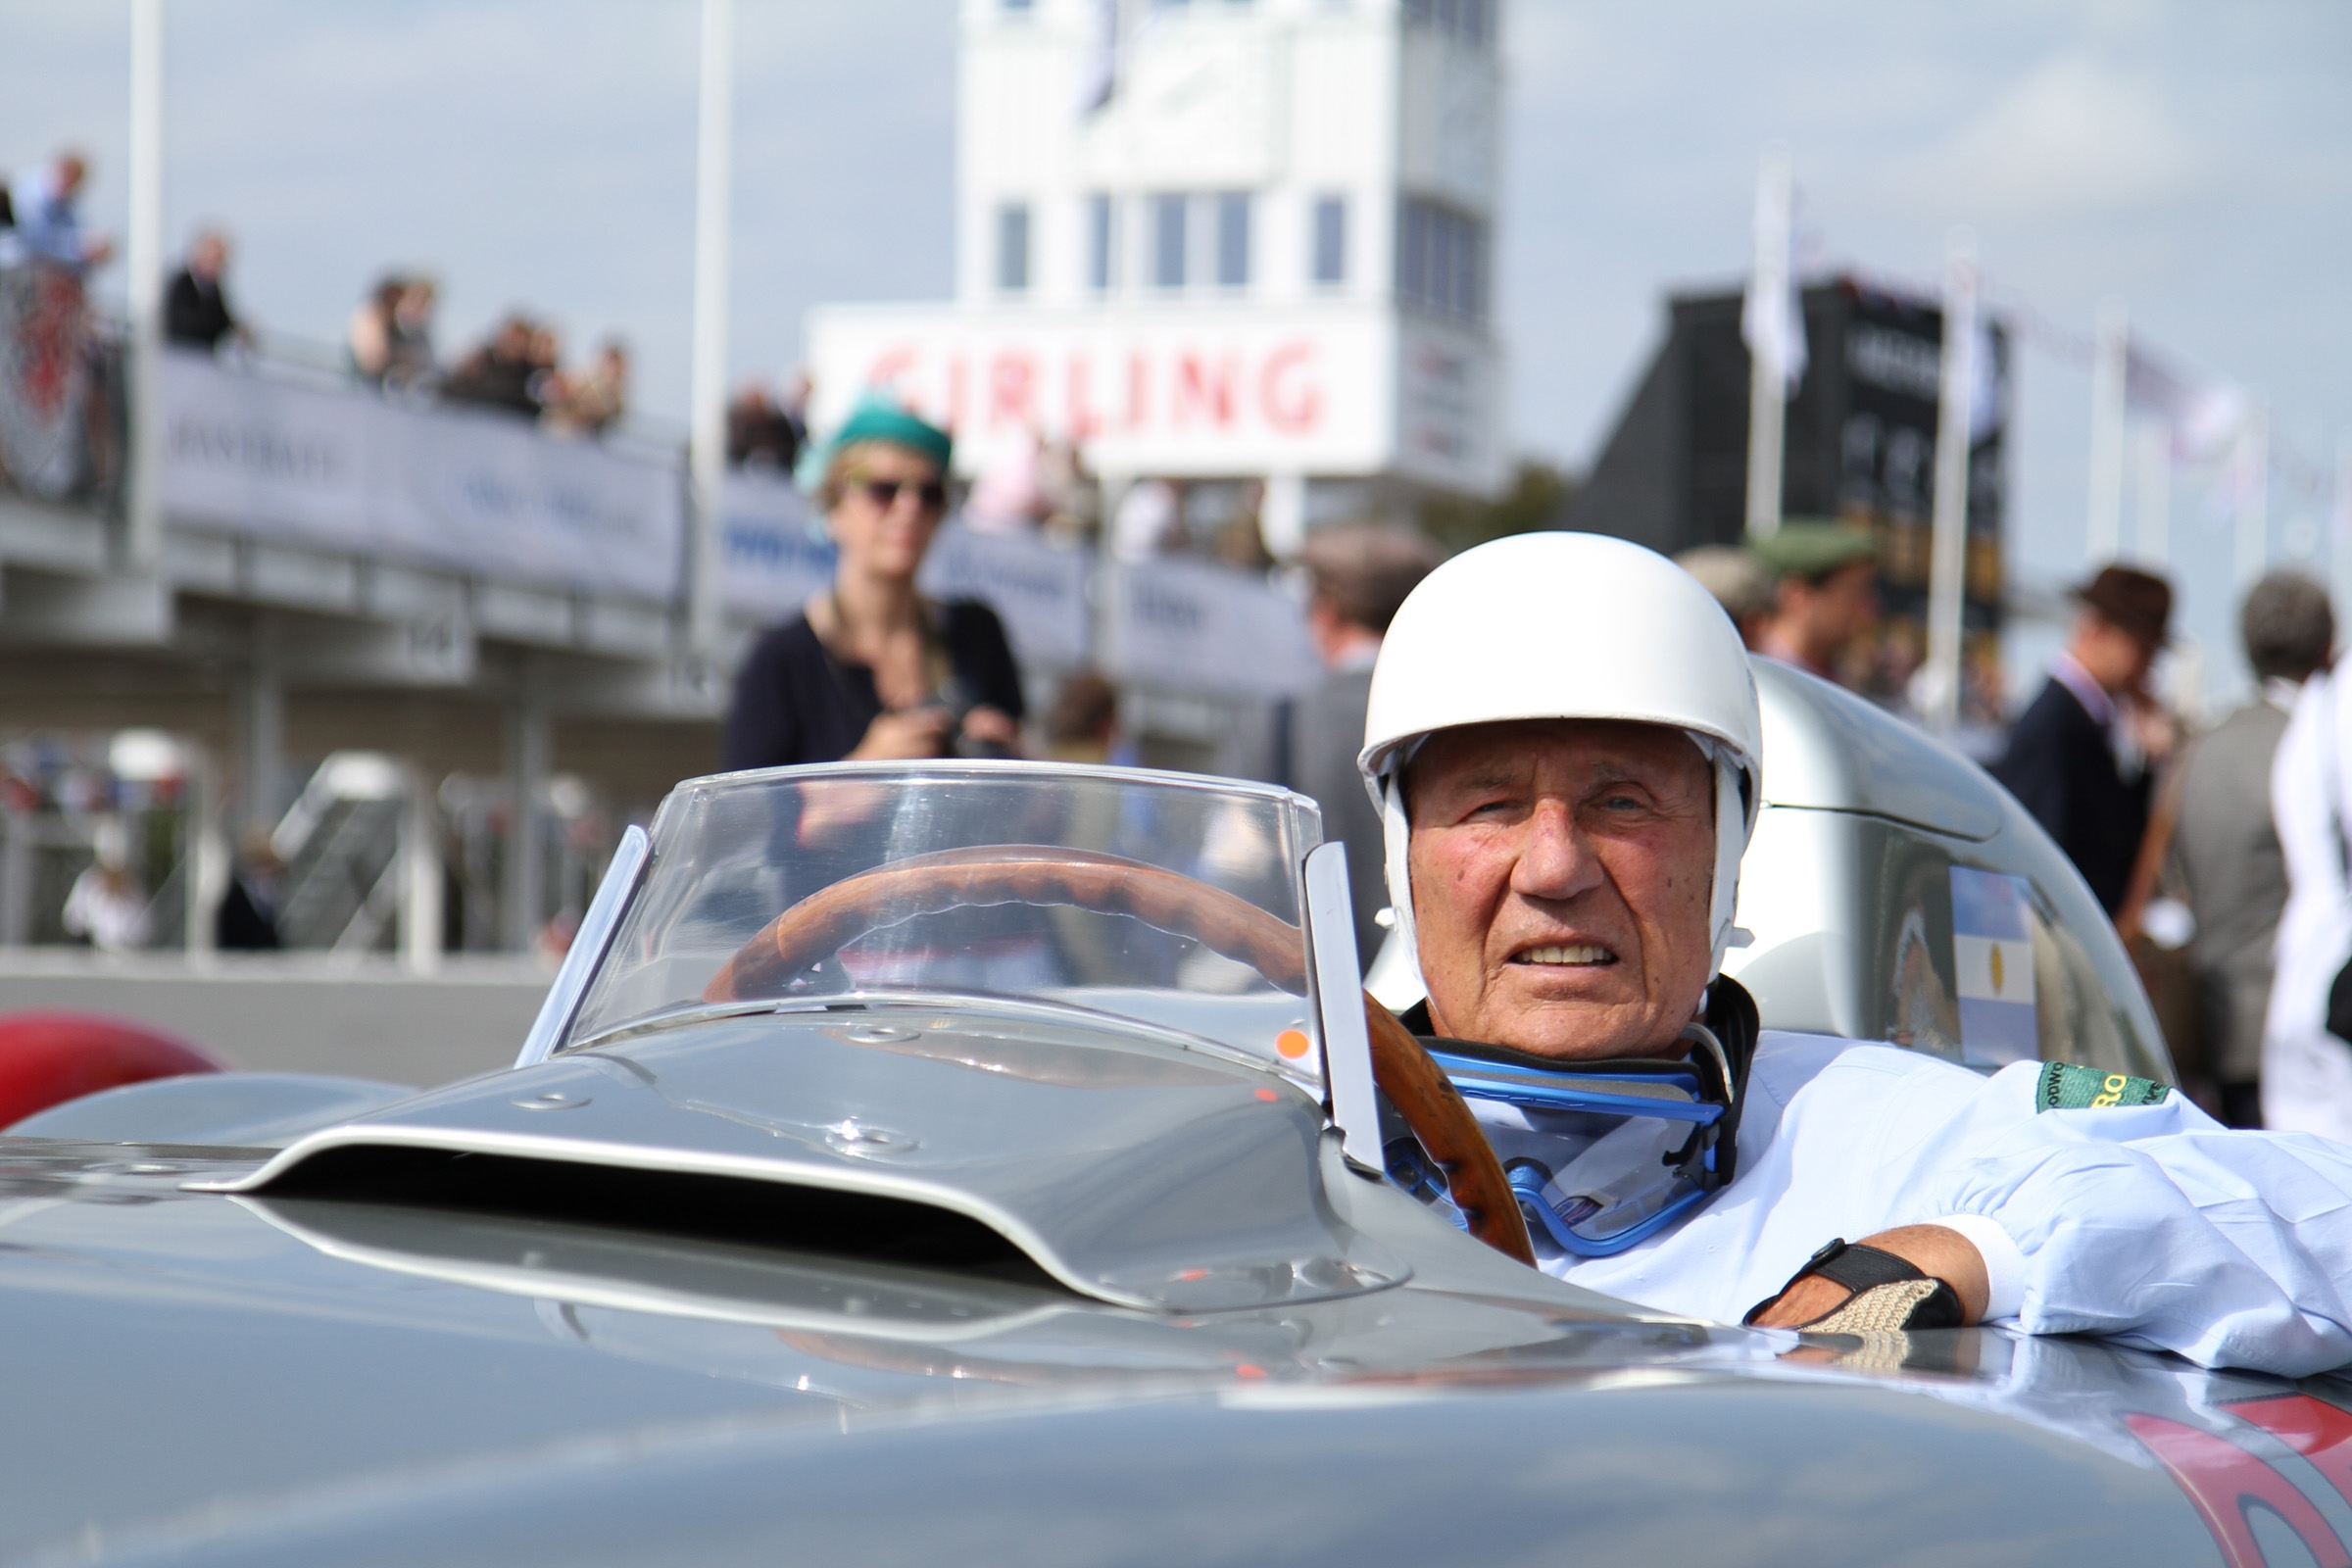 Sir Stirling Moss at Goodwood Revival